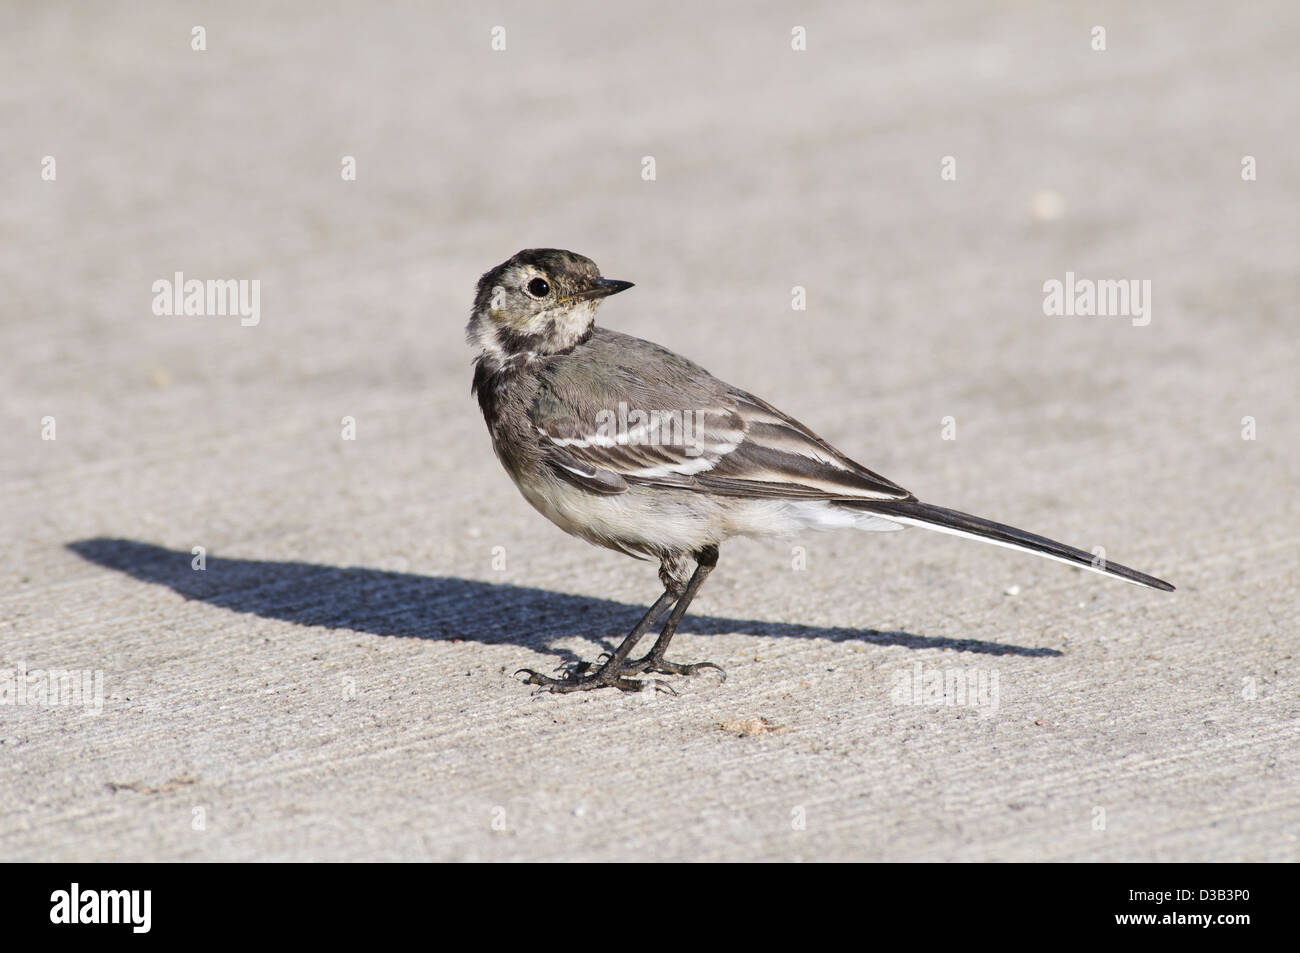 A juvenile pied wagtail (Motacilla alba) Standing on concrete with bright sunshine casting a strong shadow. Rainham, Essex. Stock Photo